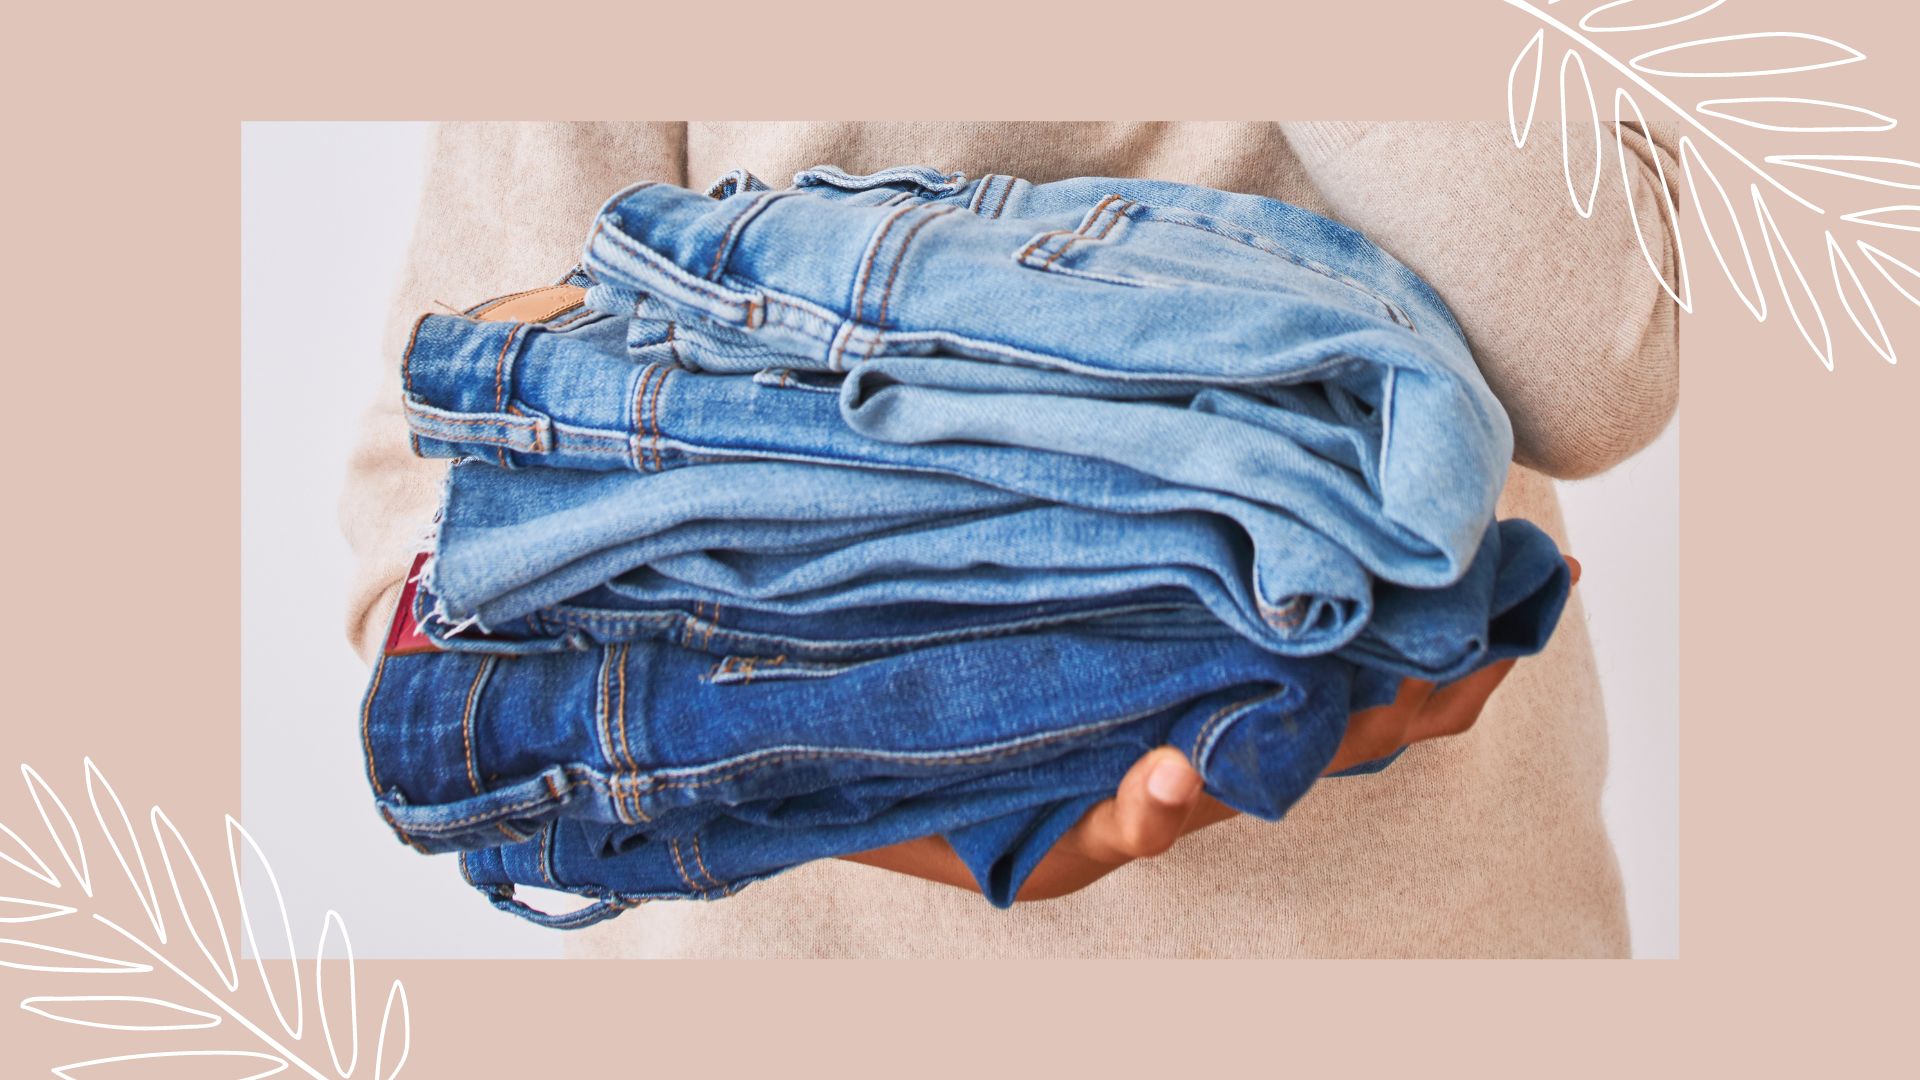 People are freezing their jeans to remove stains! Leading jeans